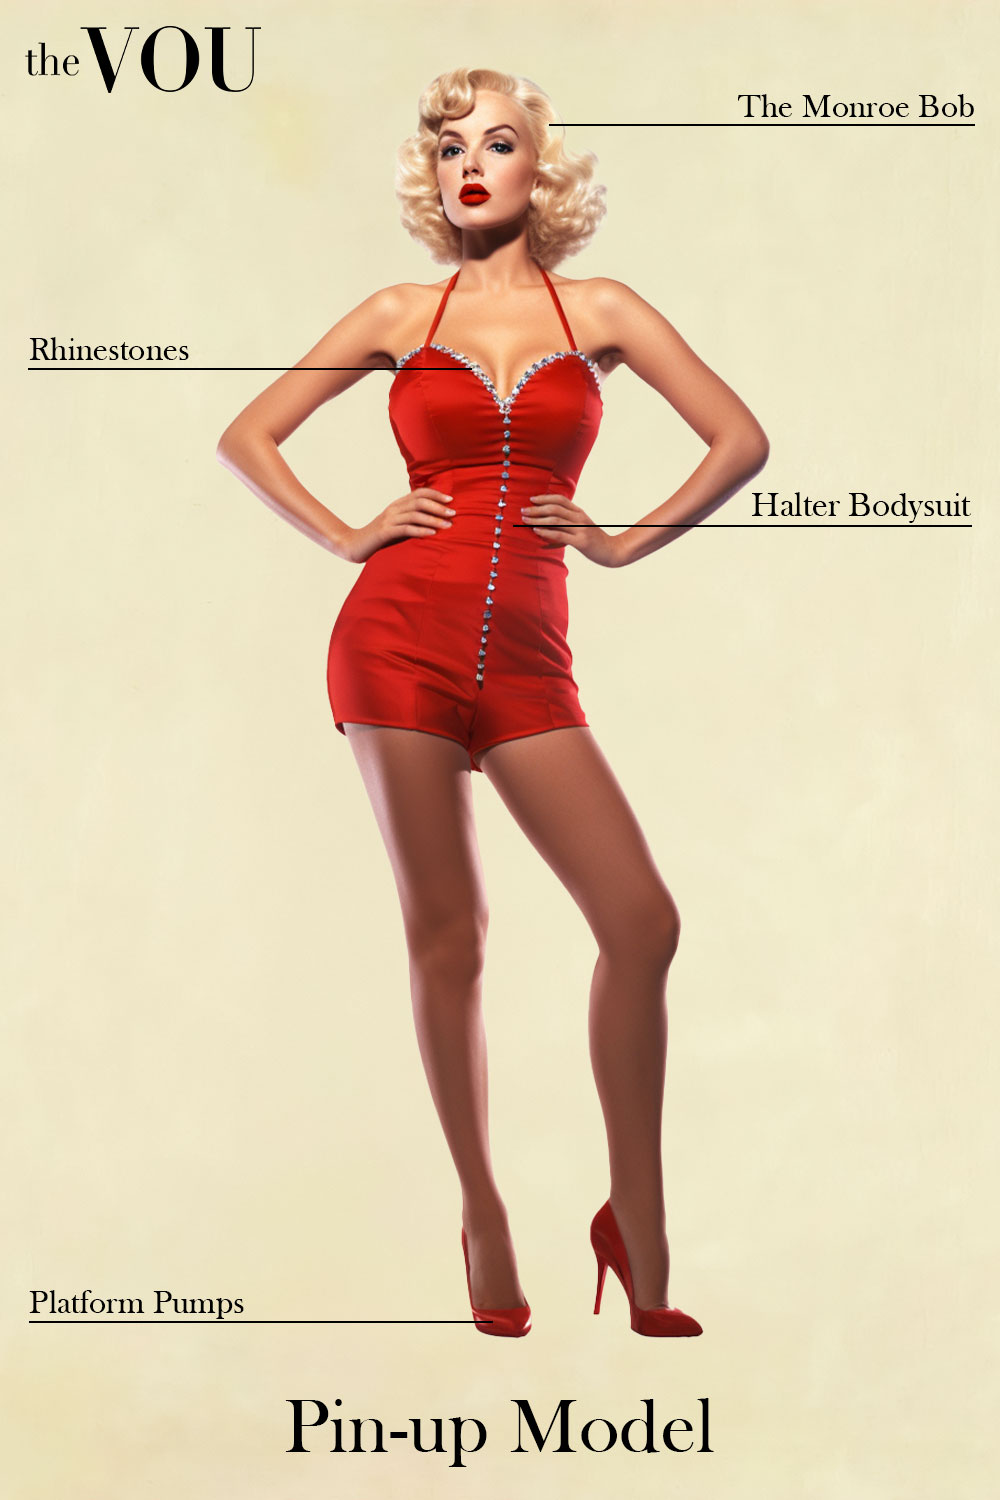 Pin-up model style